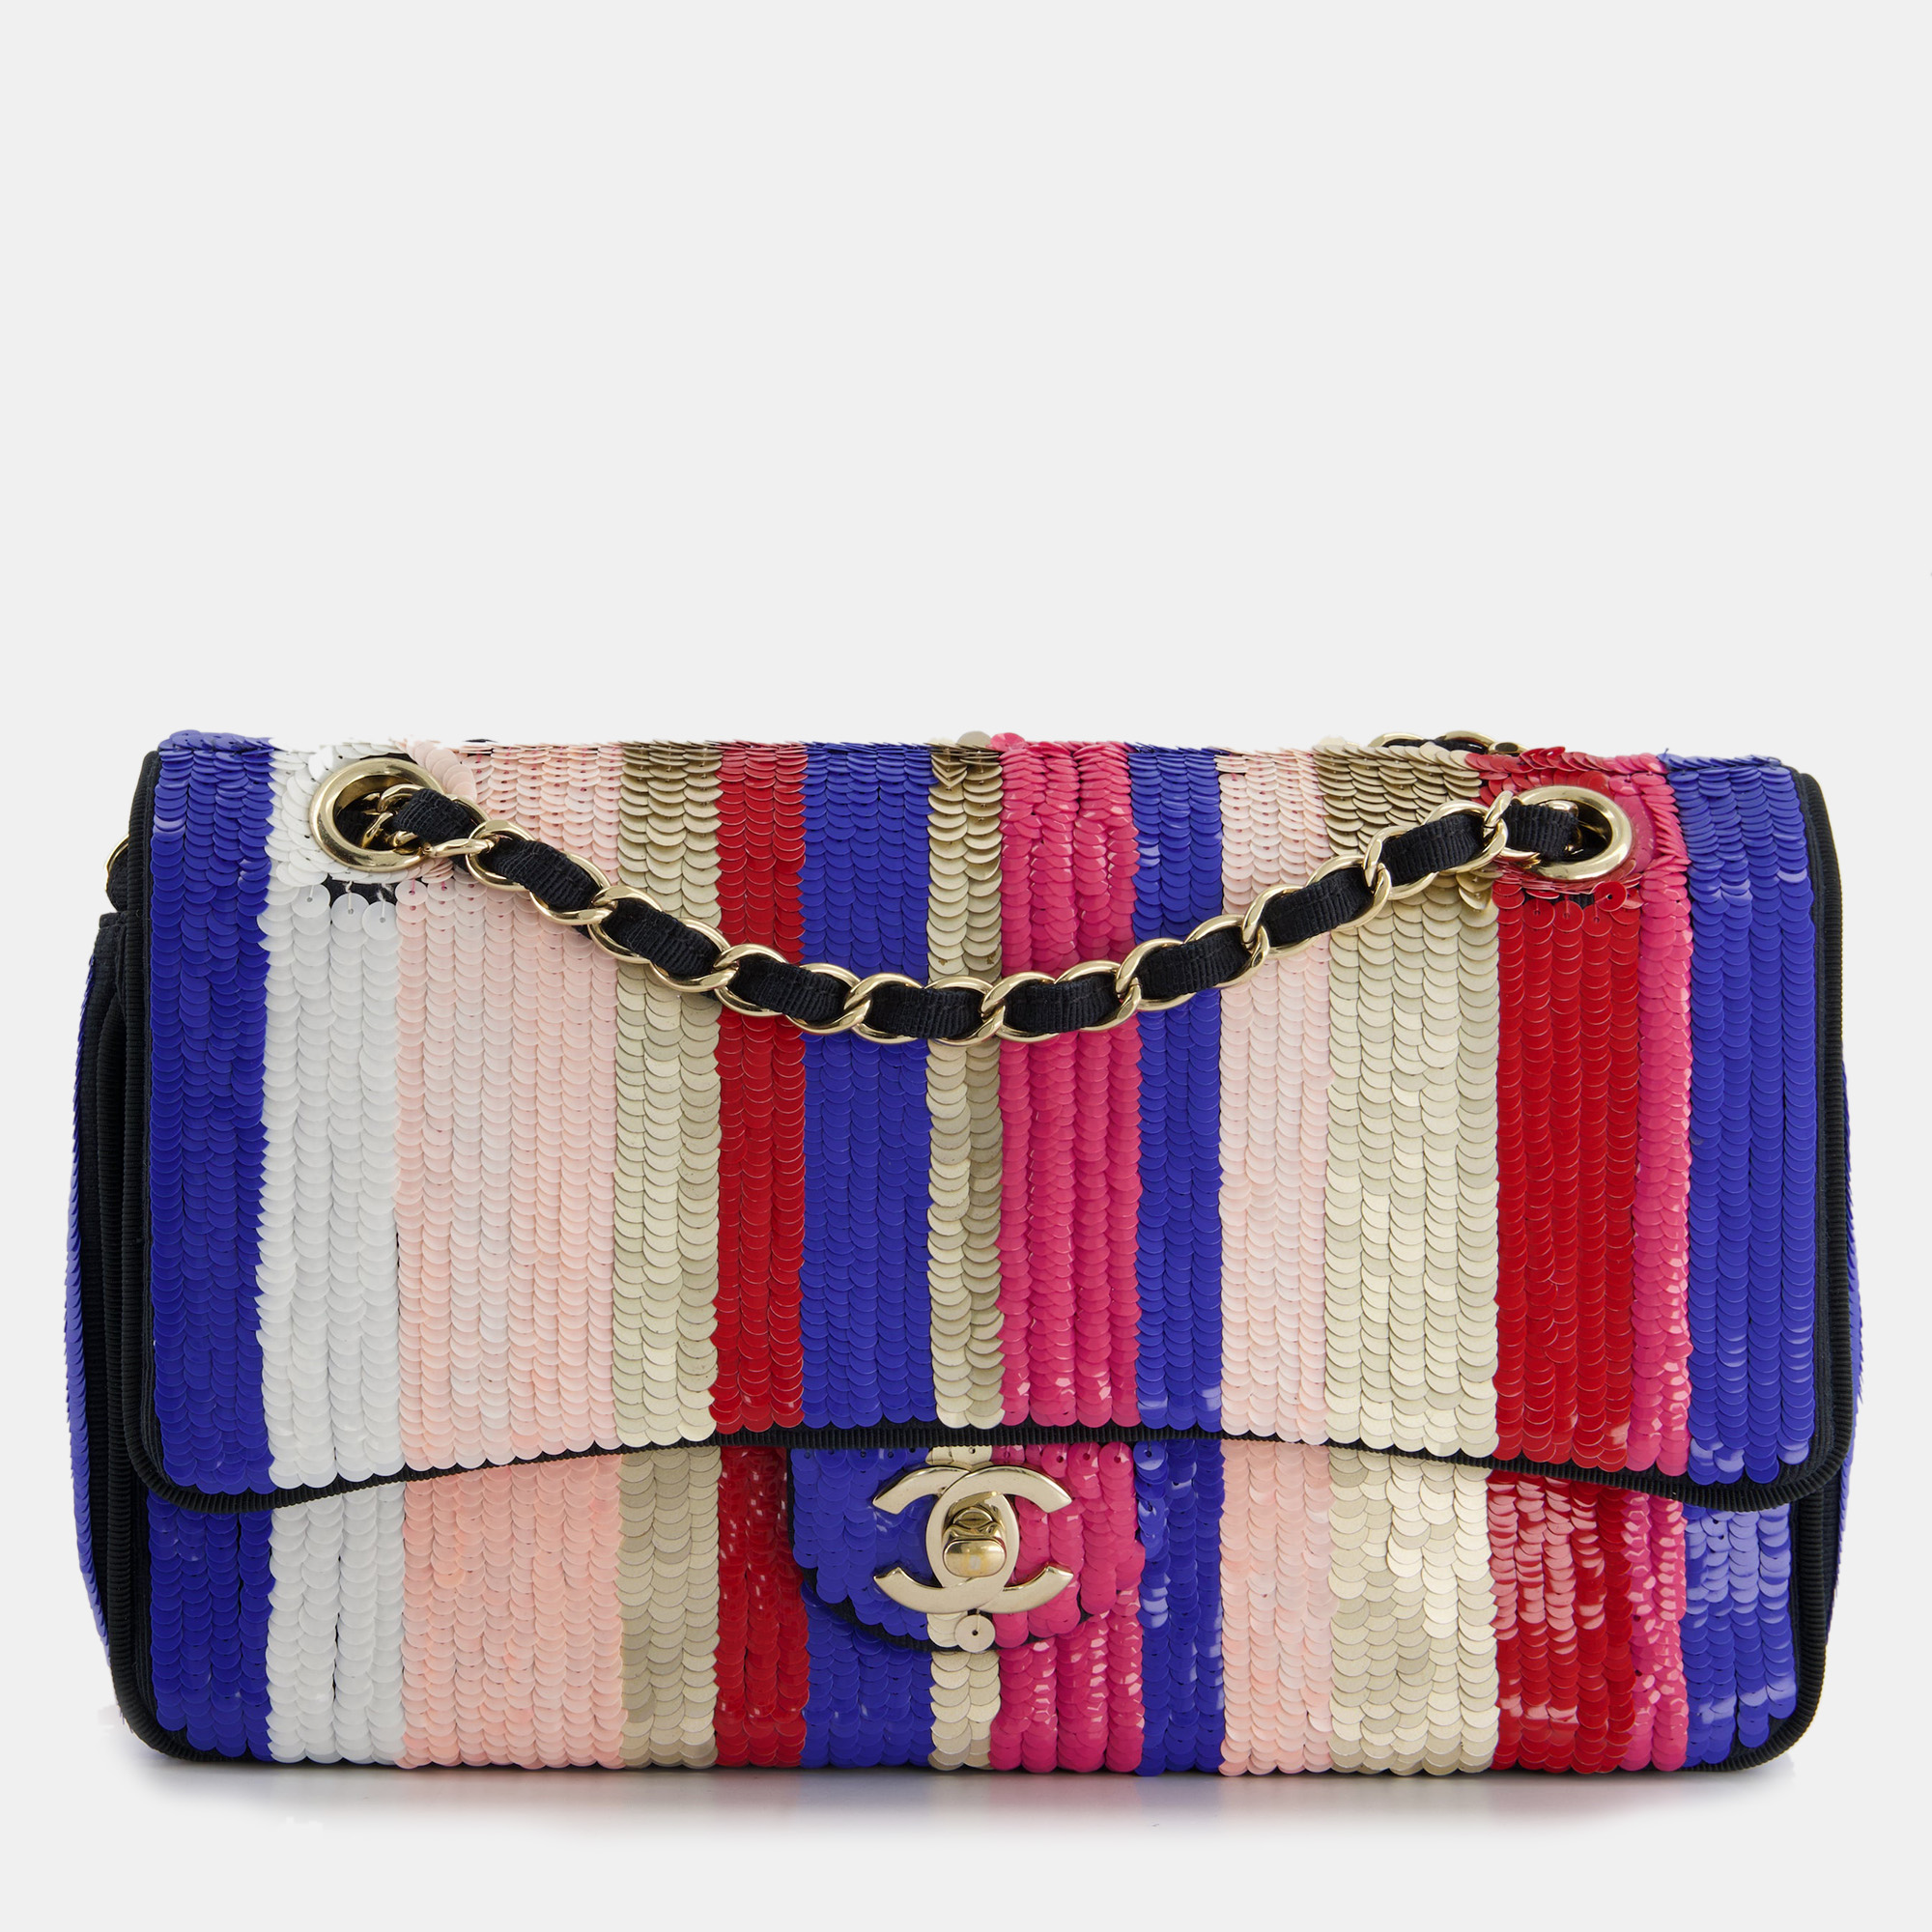 Chanel multi-colour sequin stripe medium double flap bag with champagne gold hardware